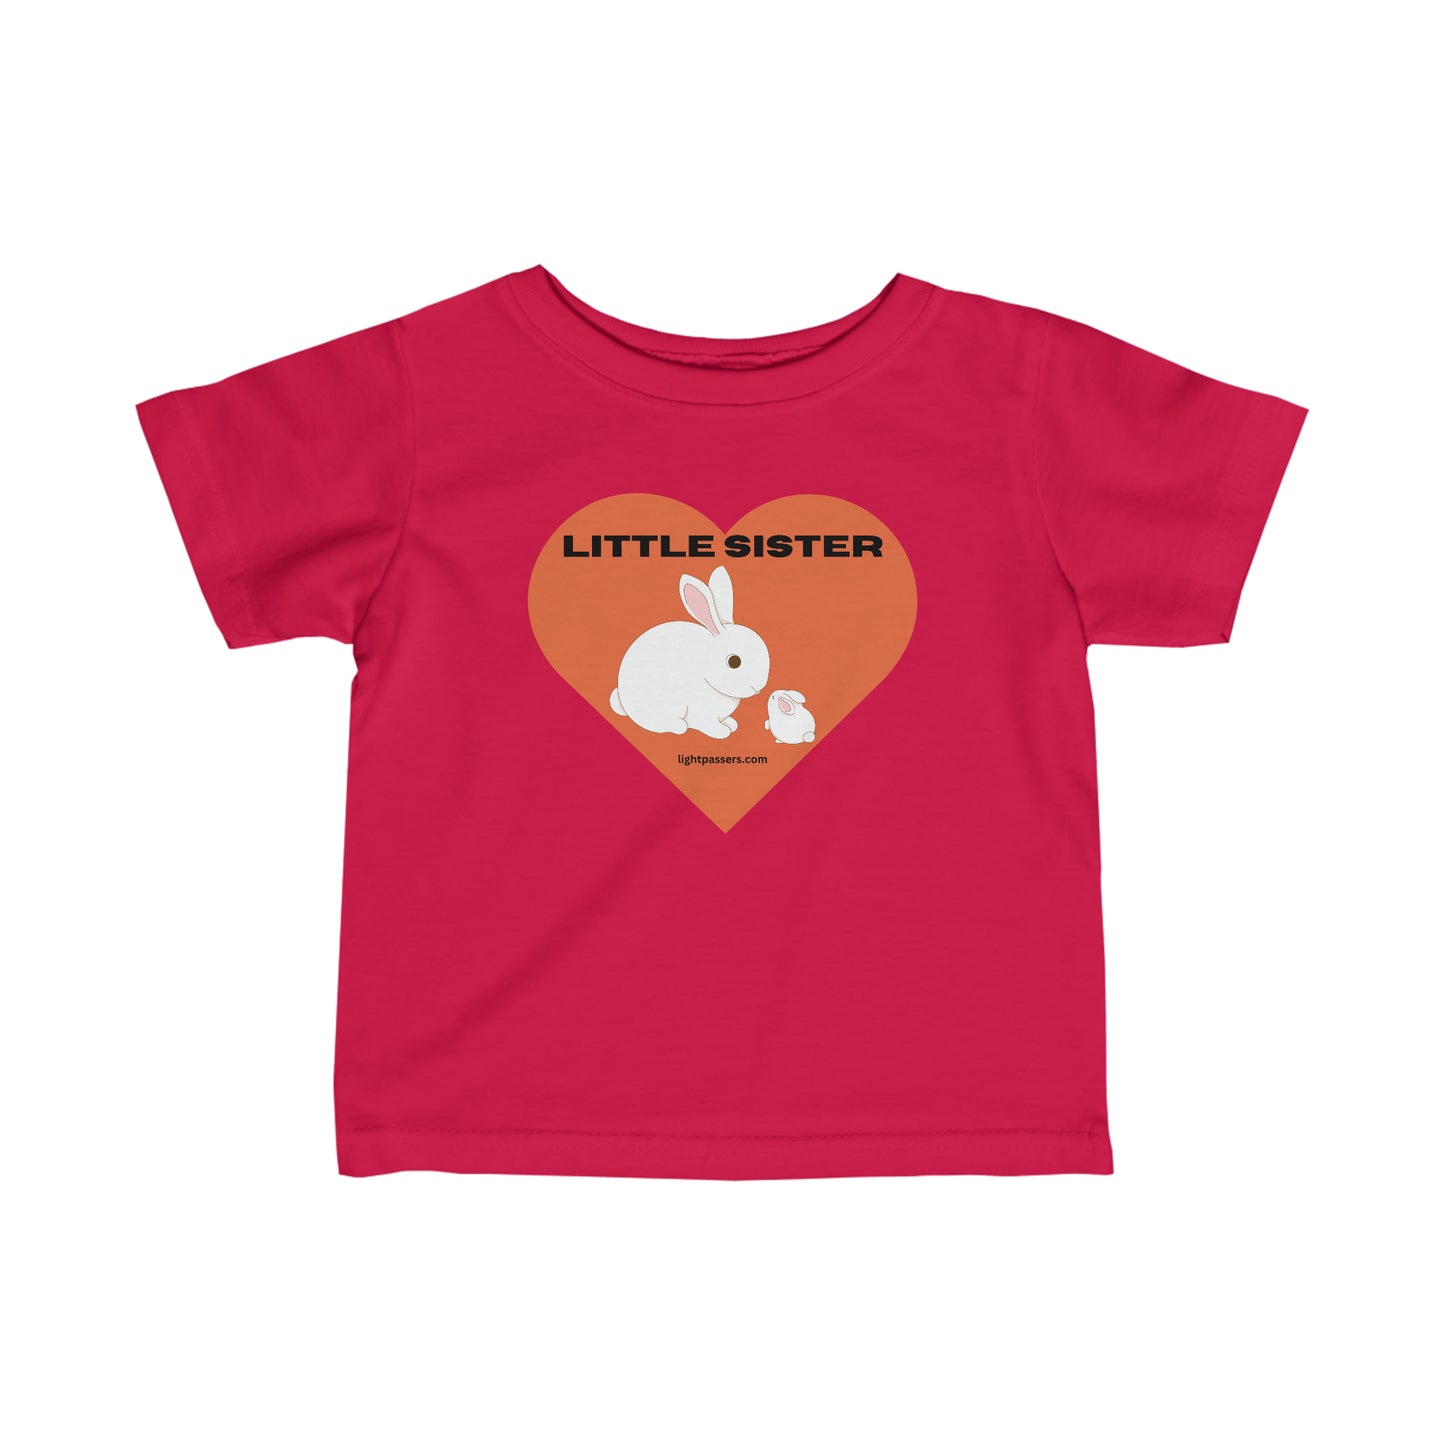 Light Passers Marketplace LIttle Sister Baby Infant Fine Jersey T-shirts Simple Messages, Mental Health